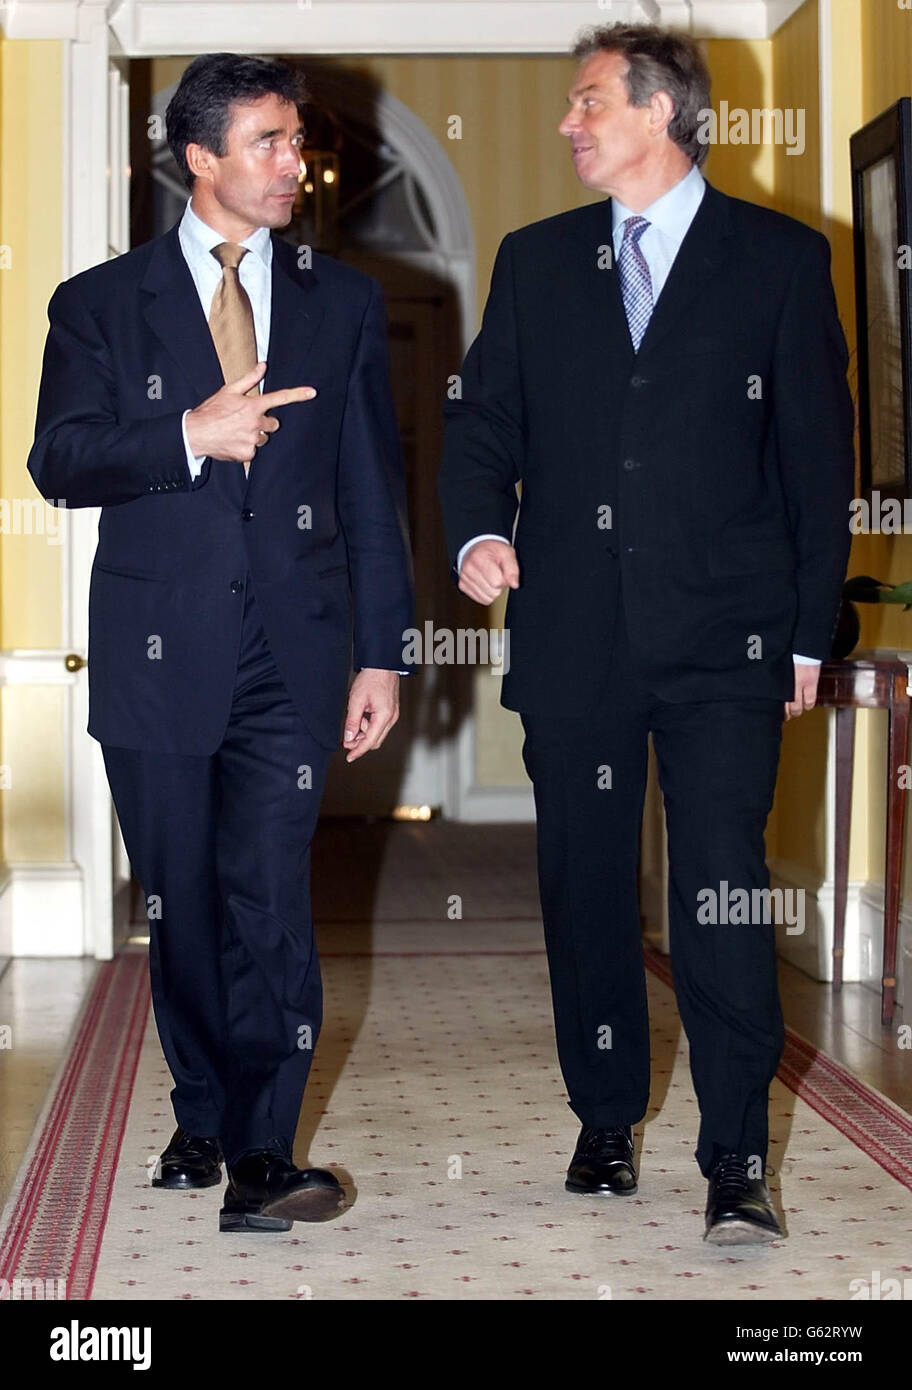 Danish Prime Minister Anders Fogh Rasmussen arrives with British Prime Minister Tony Blair at No.10 Downing Street, London, for a press conference on Europe and the terrorist attack in Bali. Stock Photo